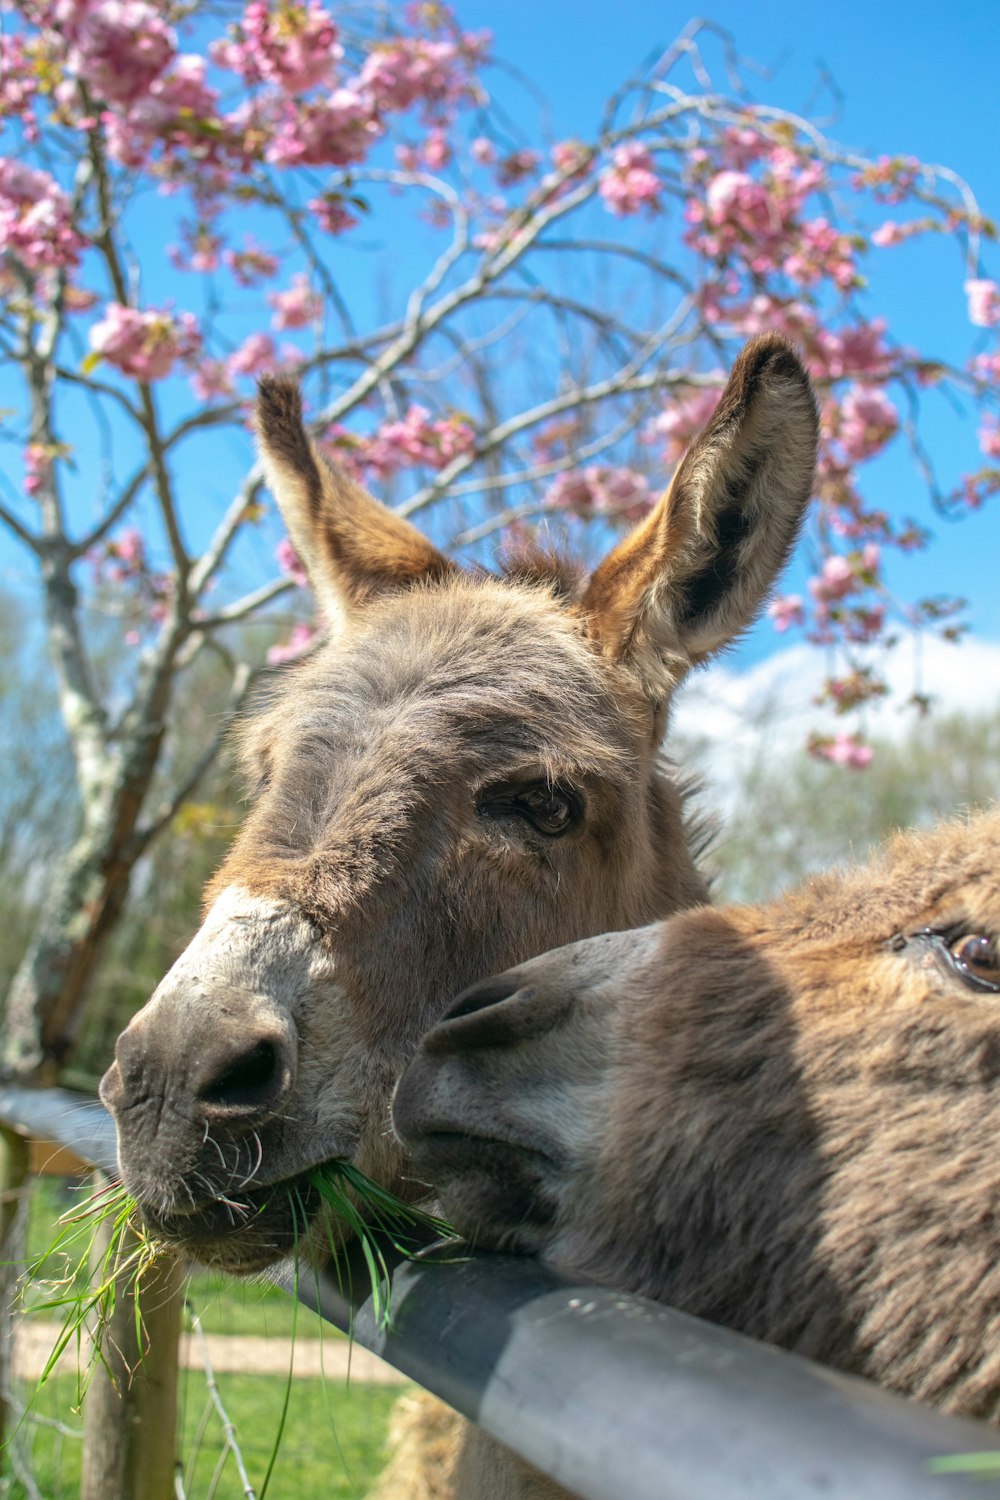 two donkeys eating grass in a fenced in area